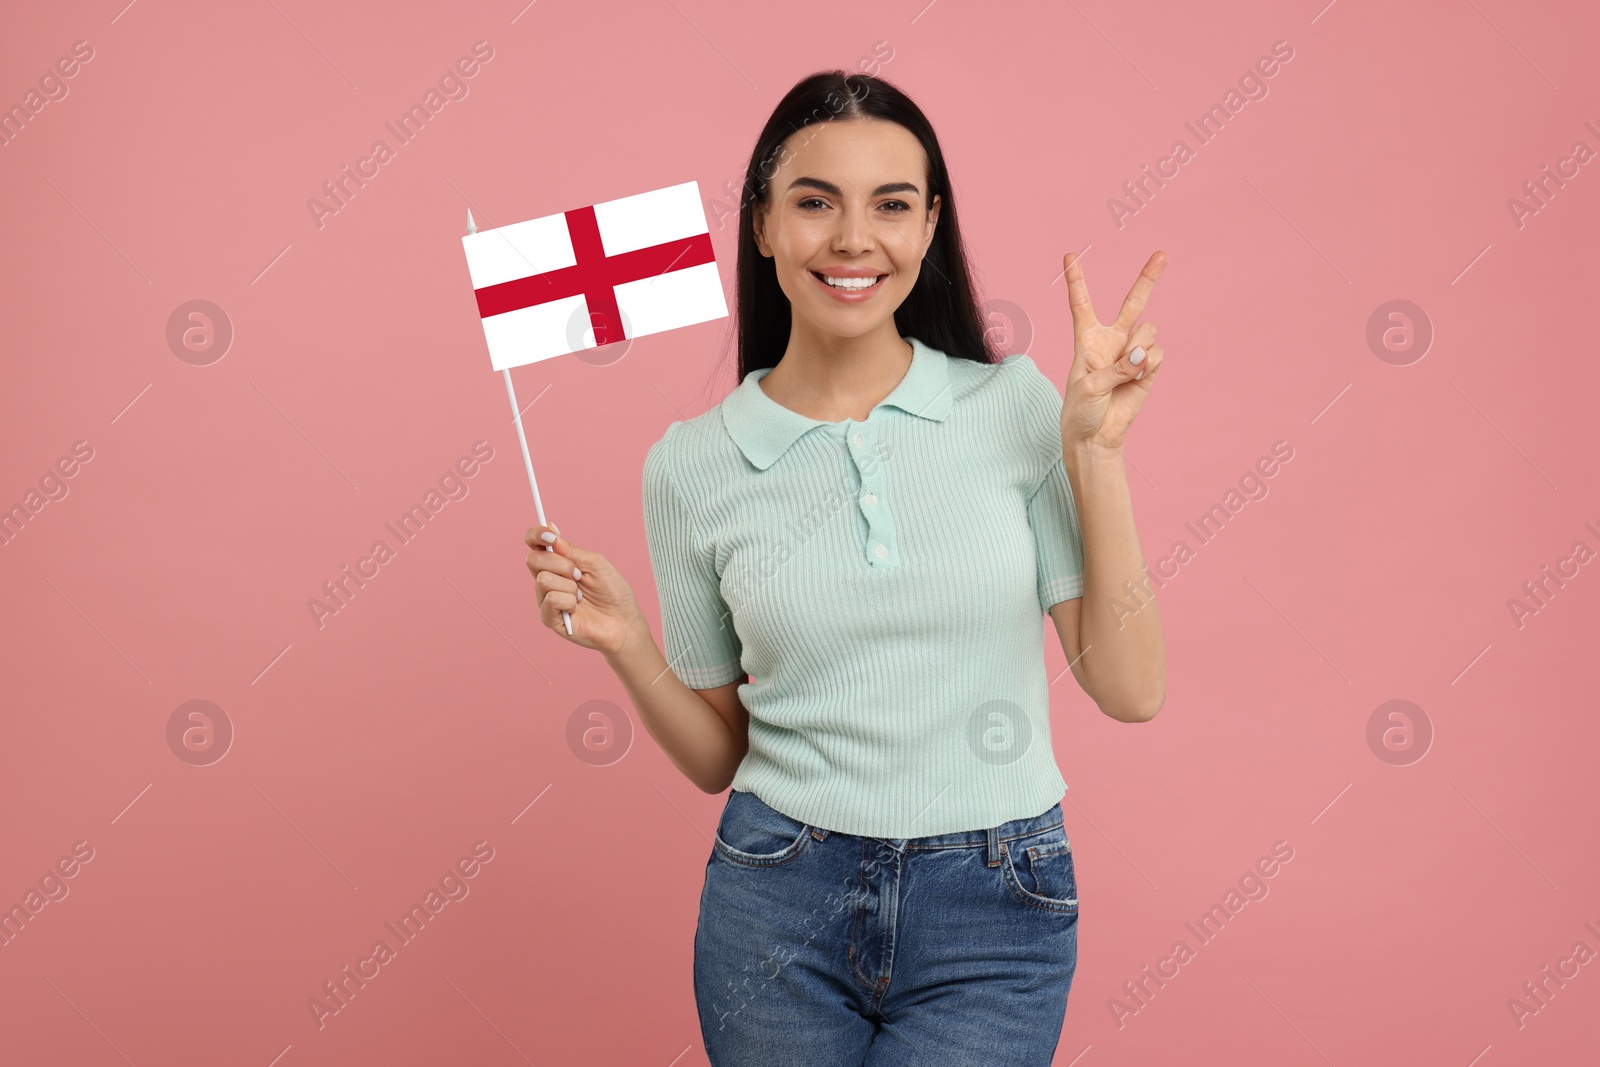 Image of Happy young woman with flag of England showing V-sign on pink background